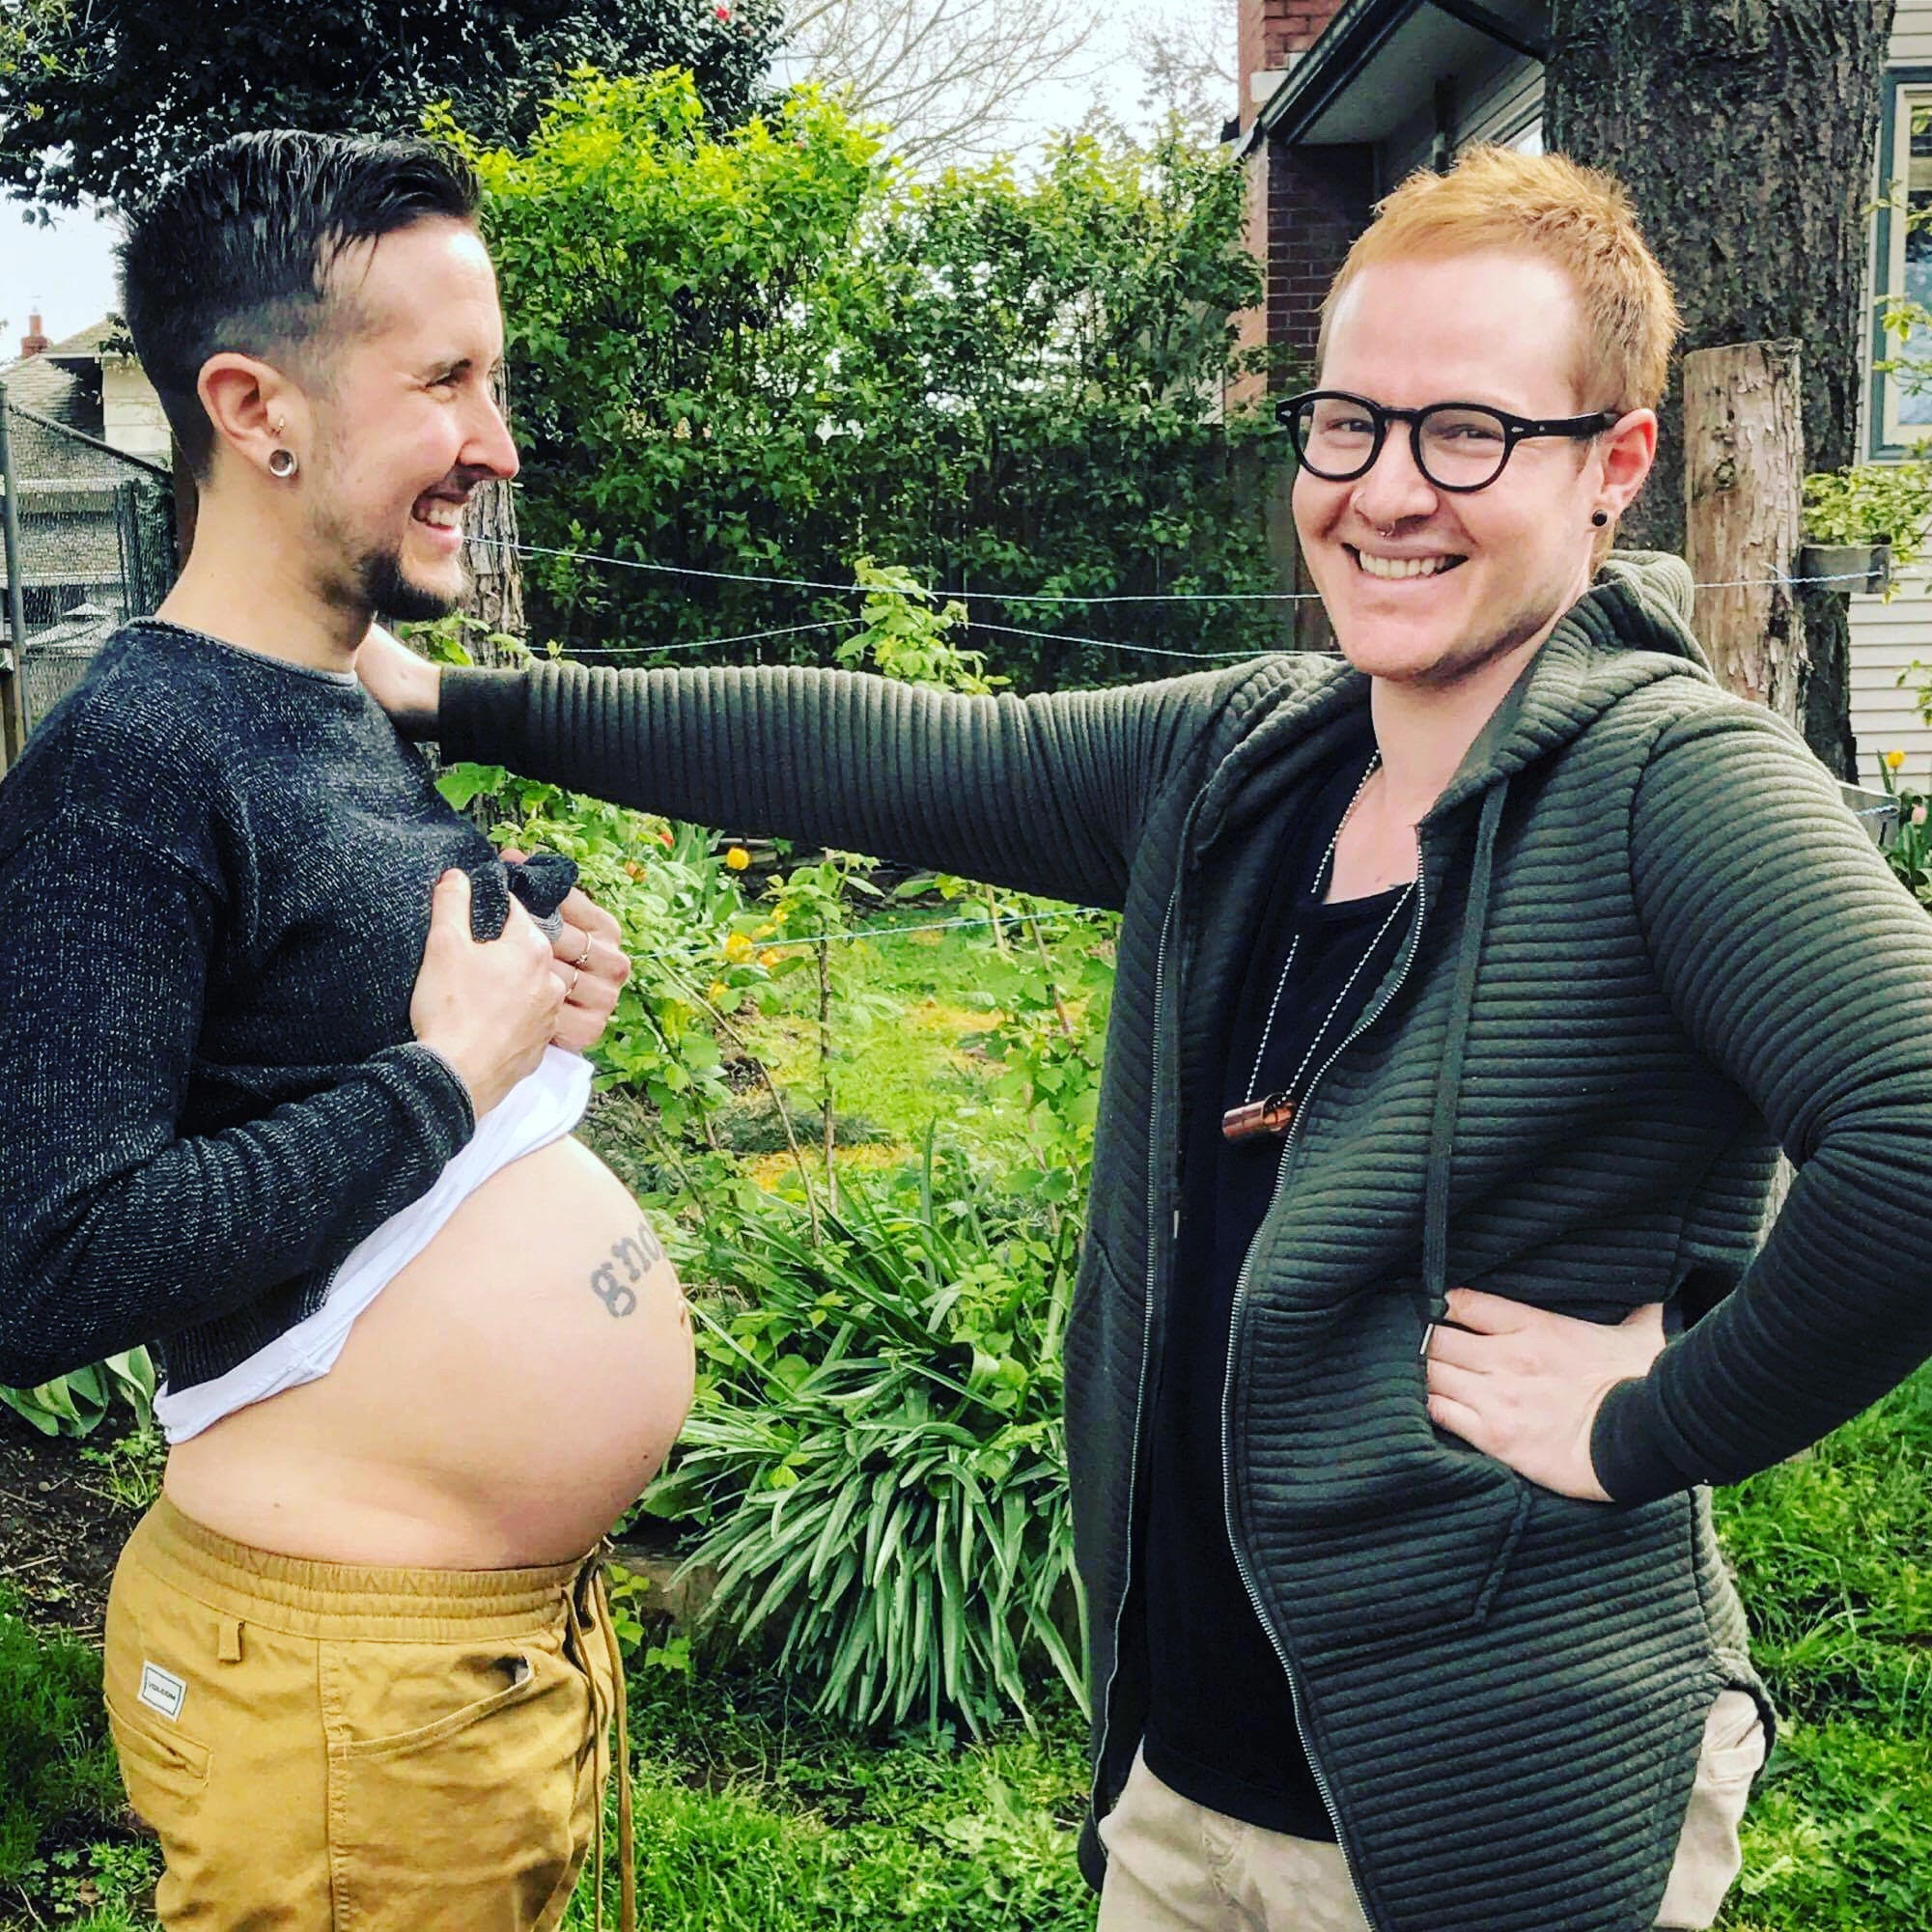 Pregnant trans man shares story to give LGBT couples hope